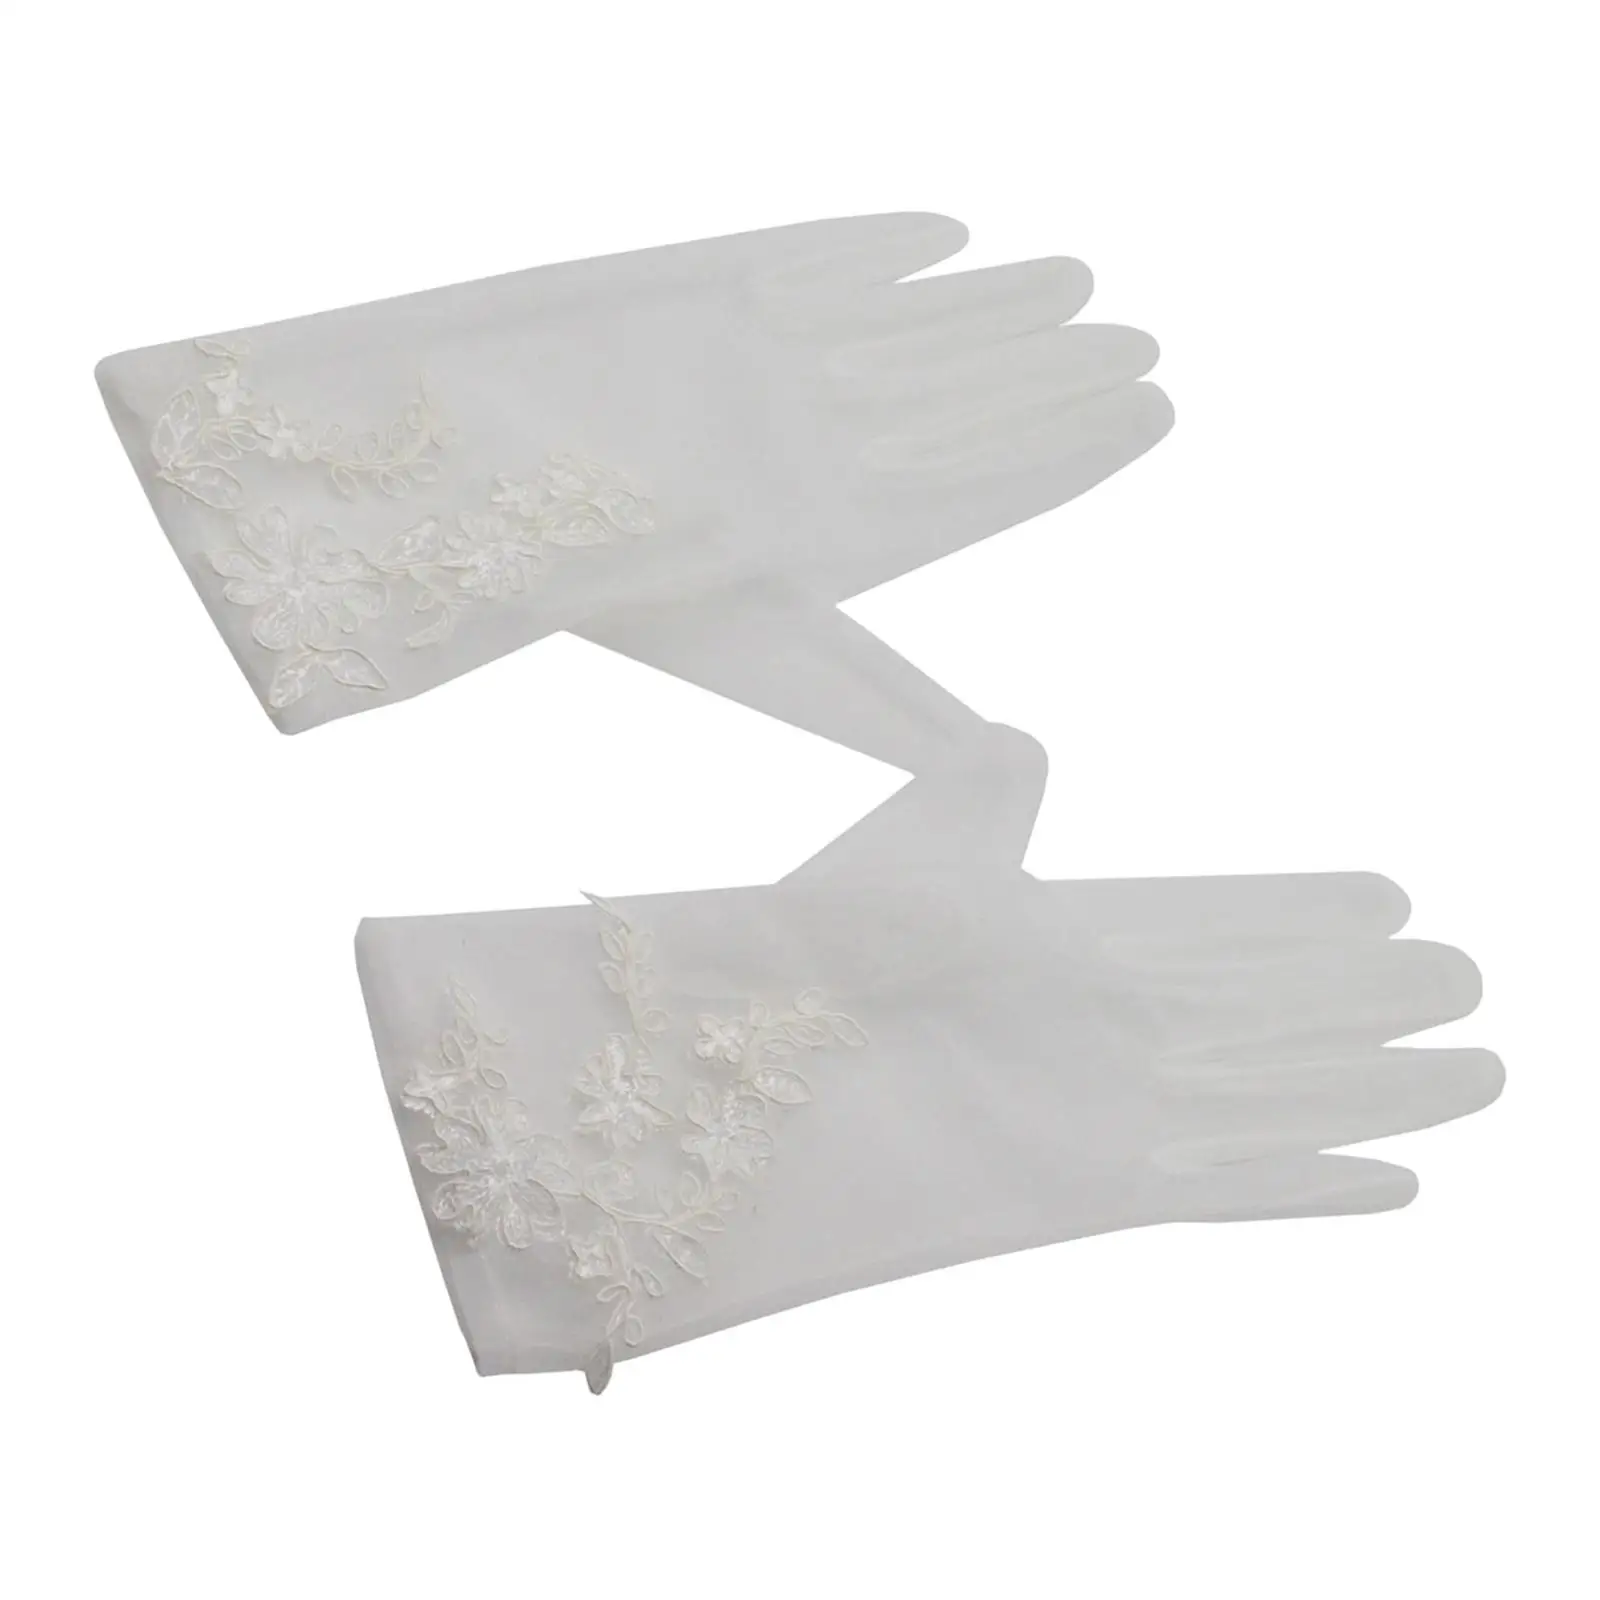 Women Lace Glove Short Tulle Gloves Wrist Length White Bridal Gloves Wedding Bride Dress Gloves for Prom Costume Accessories